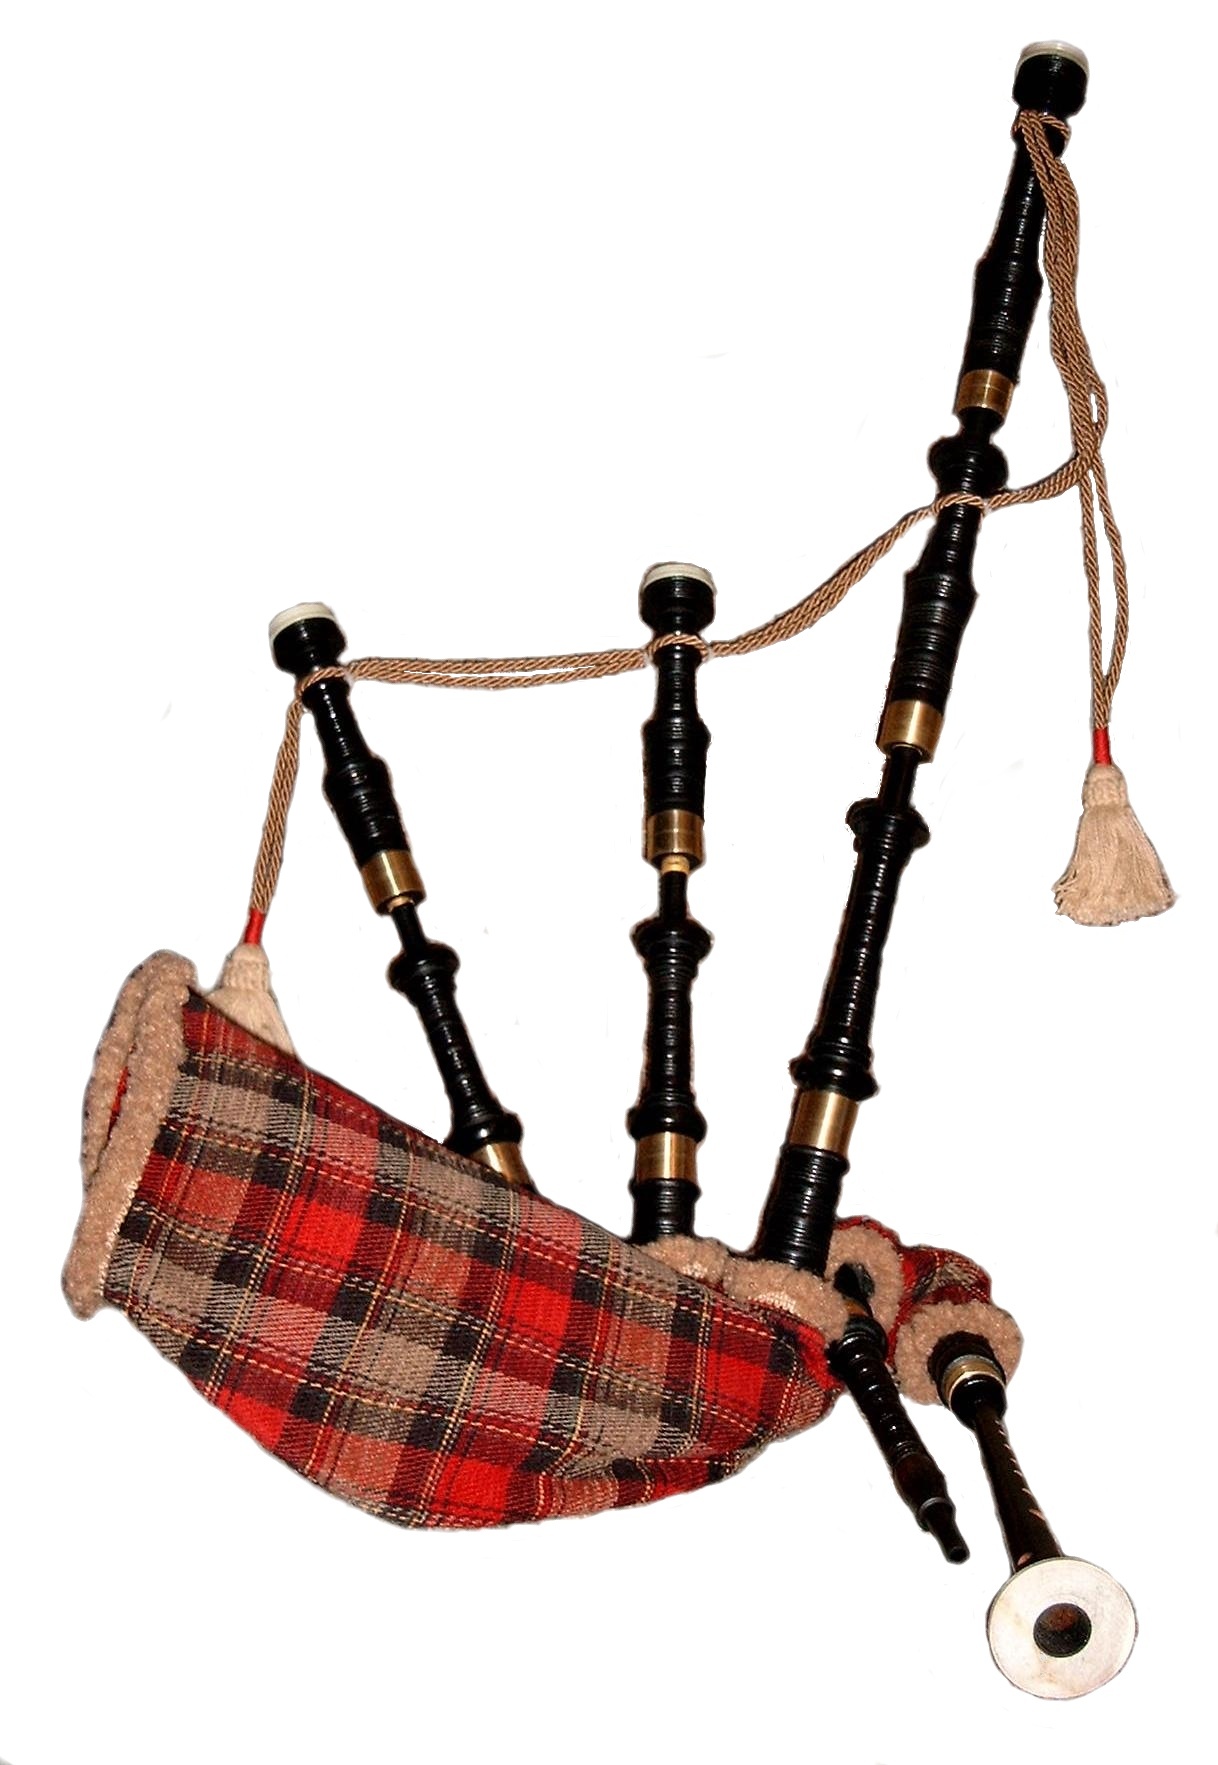 1000+ images about Bagpipes | Virginia, Keep calm and ...